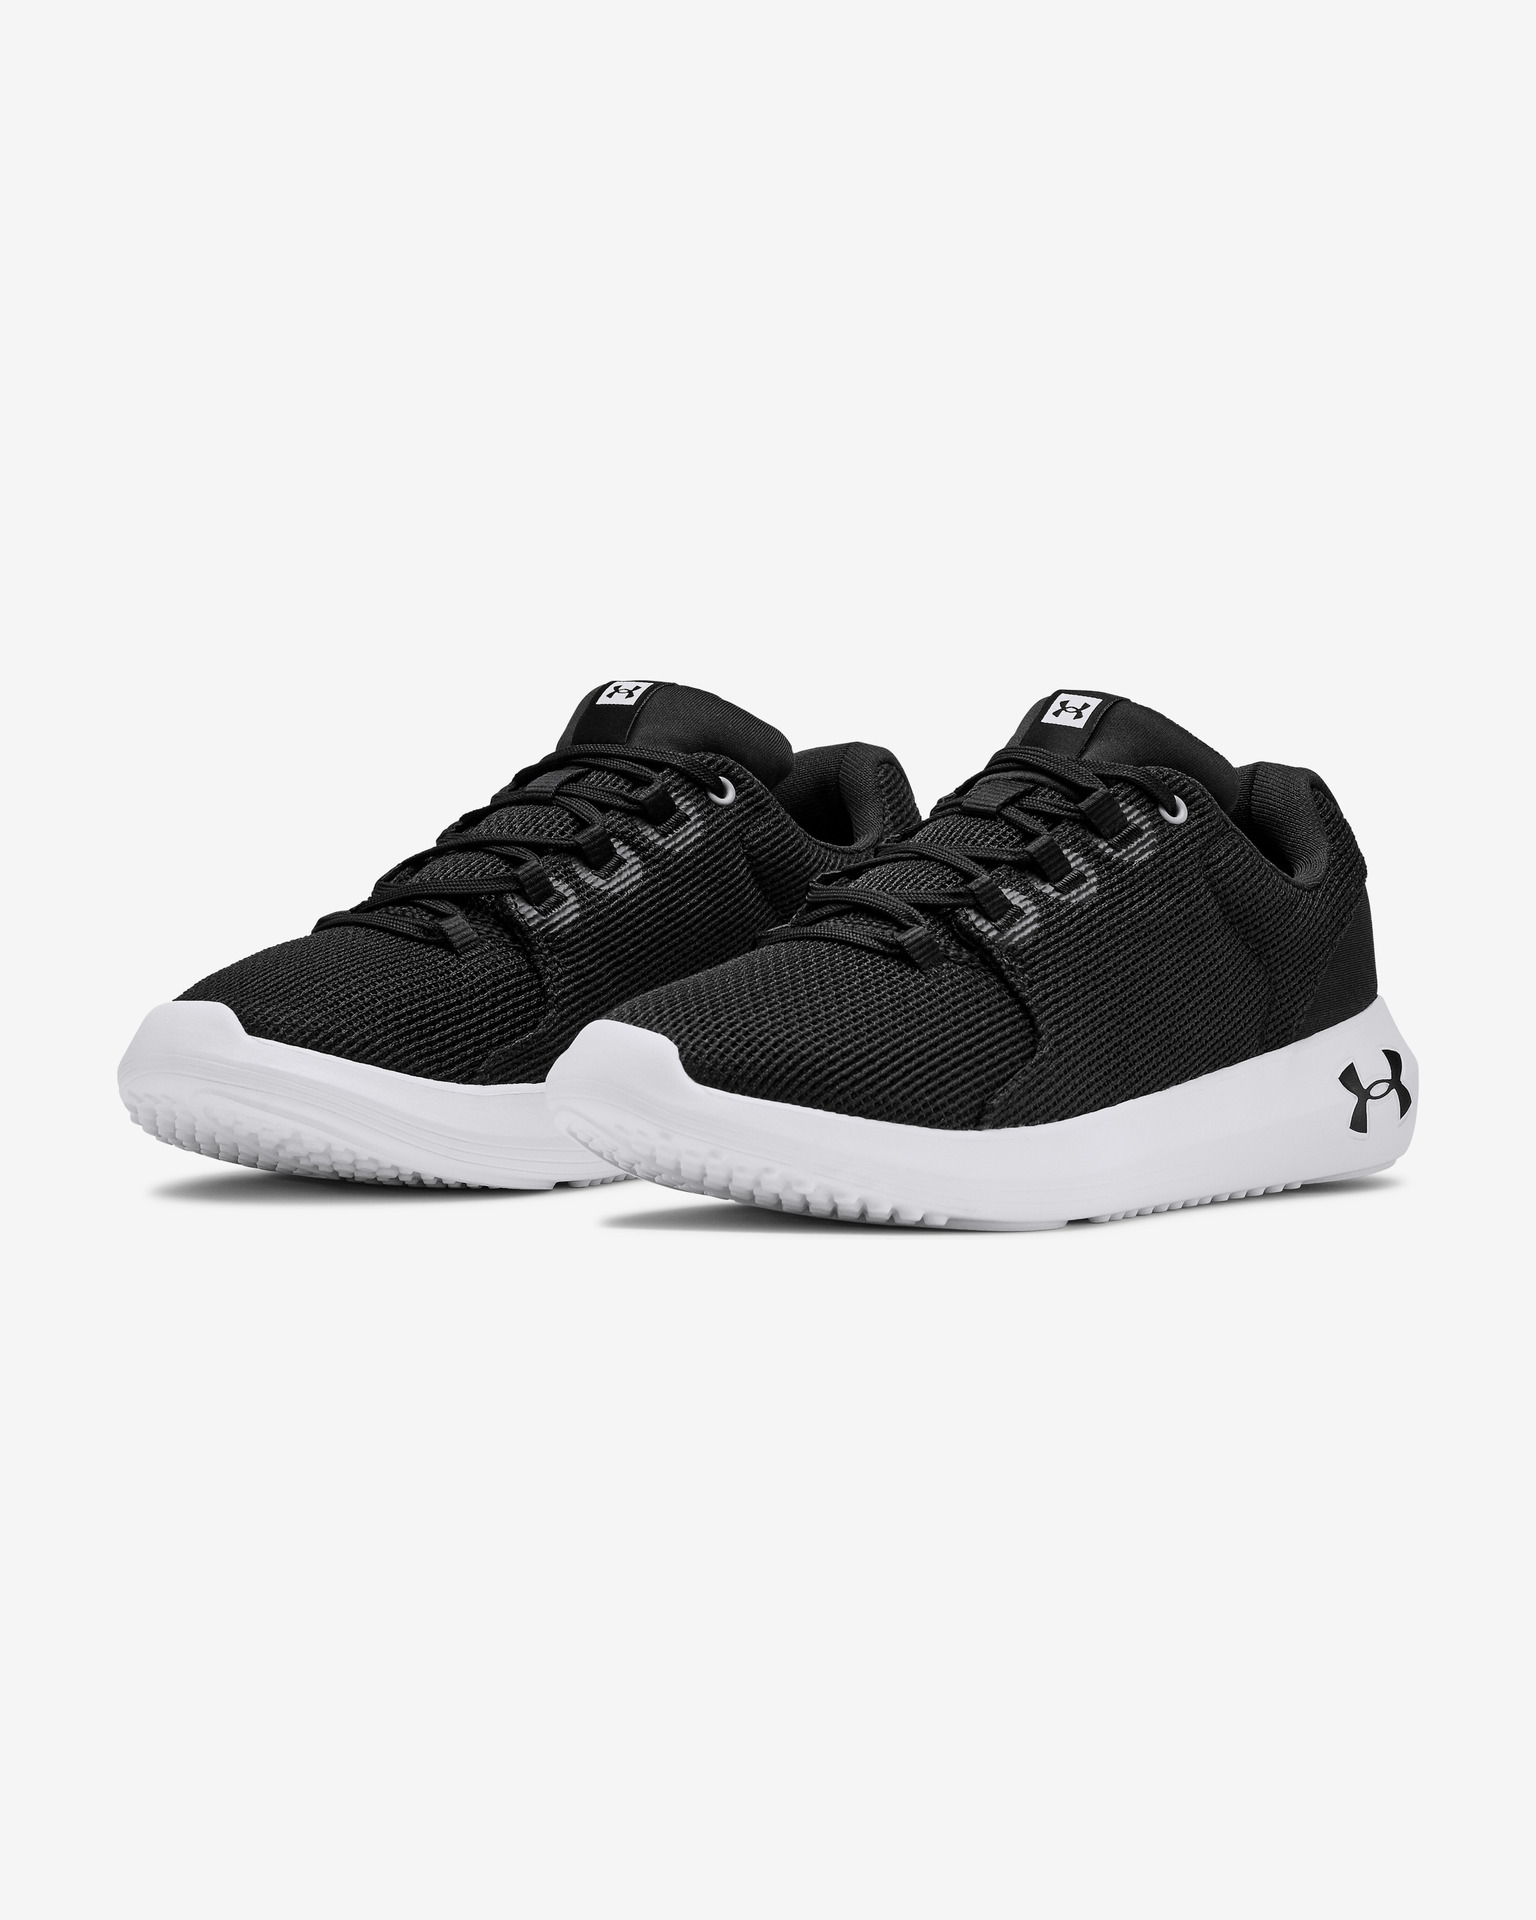 Under Armour - Ripple Sneakers